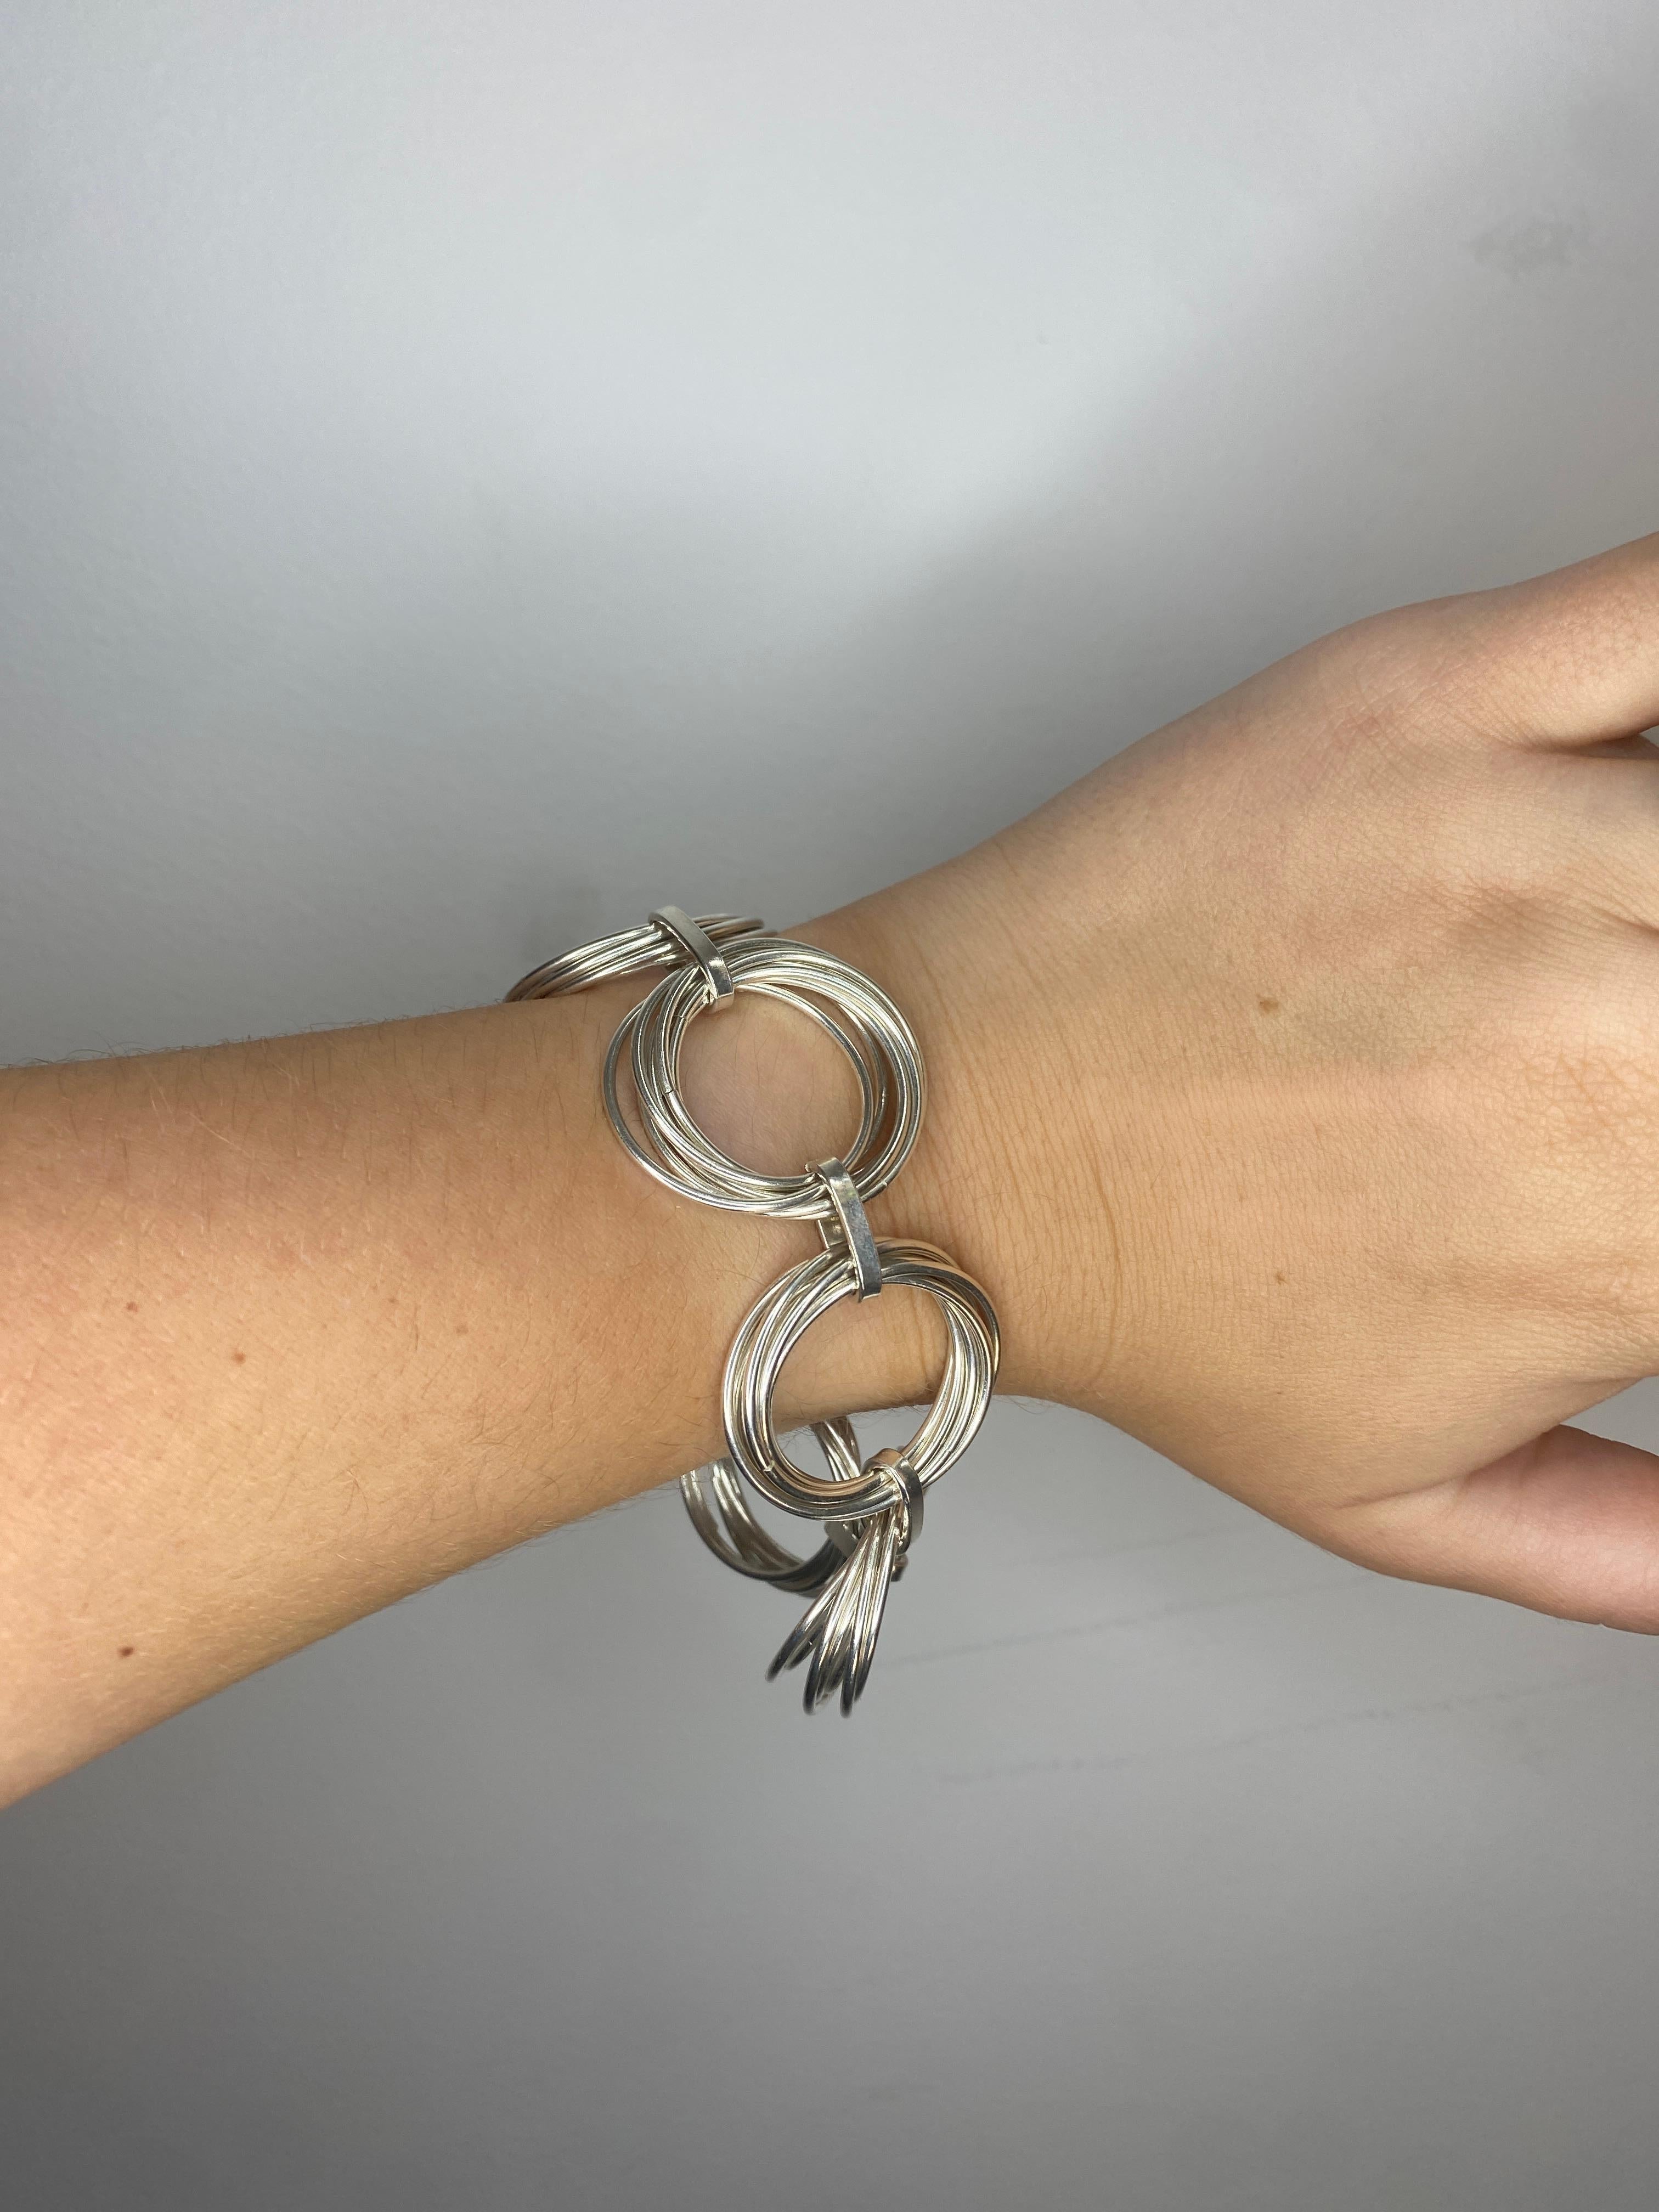 gold bracelet with circle and line through it